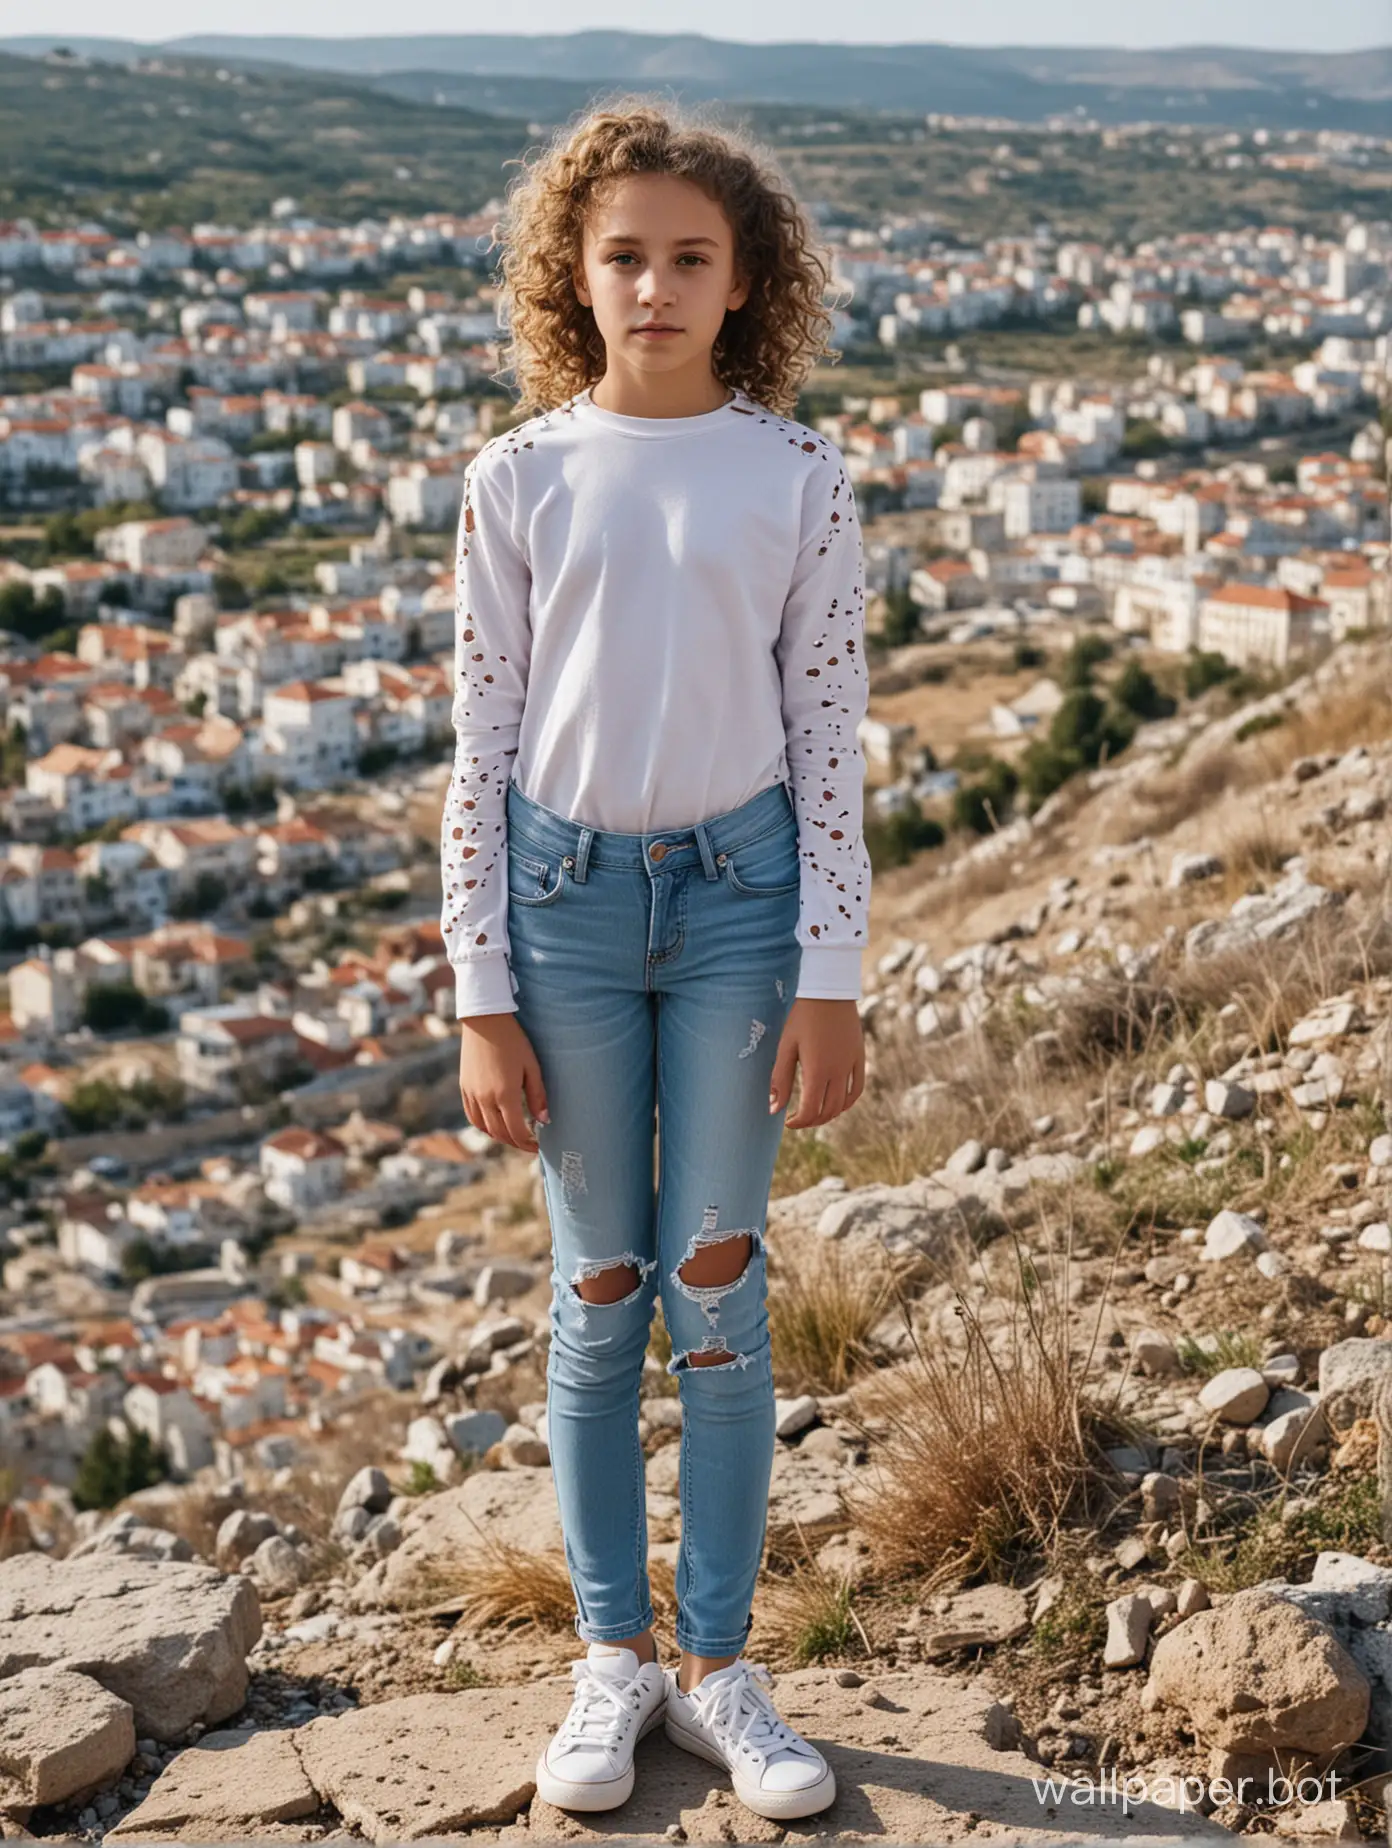 11-year-old girl with curls in light jeans with holes, Crimea, view of a small town, full-length